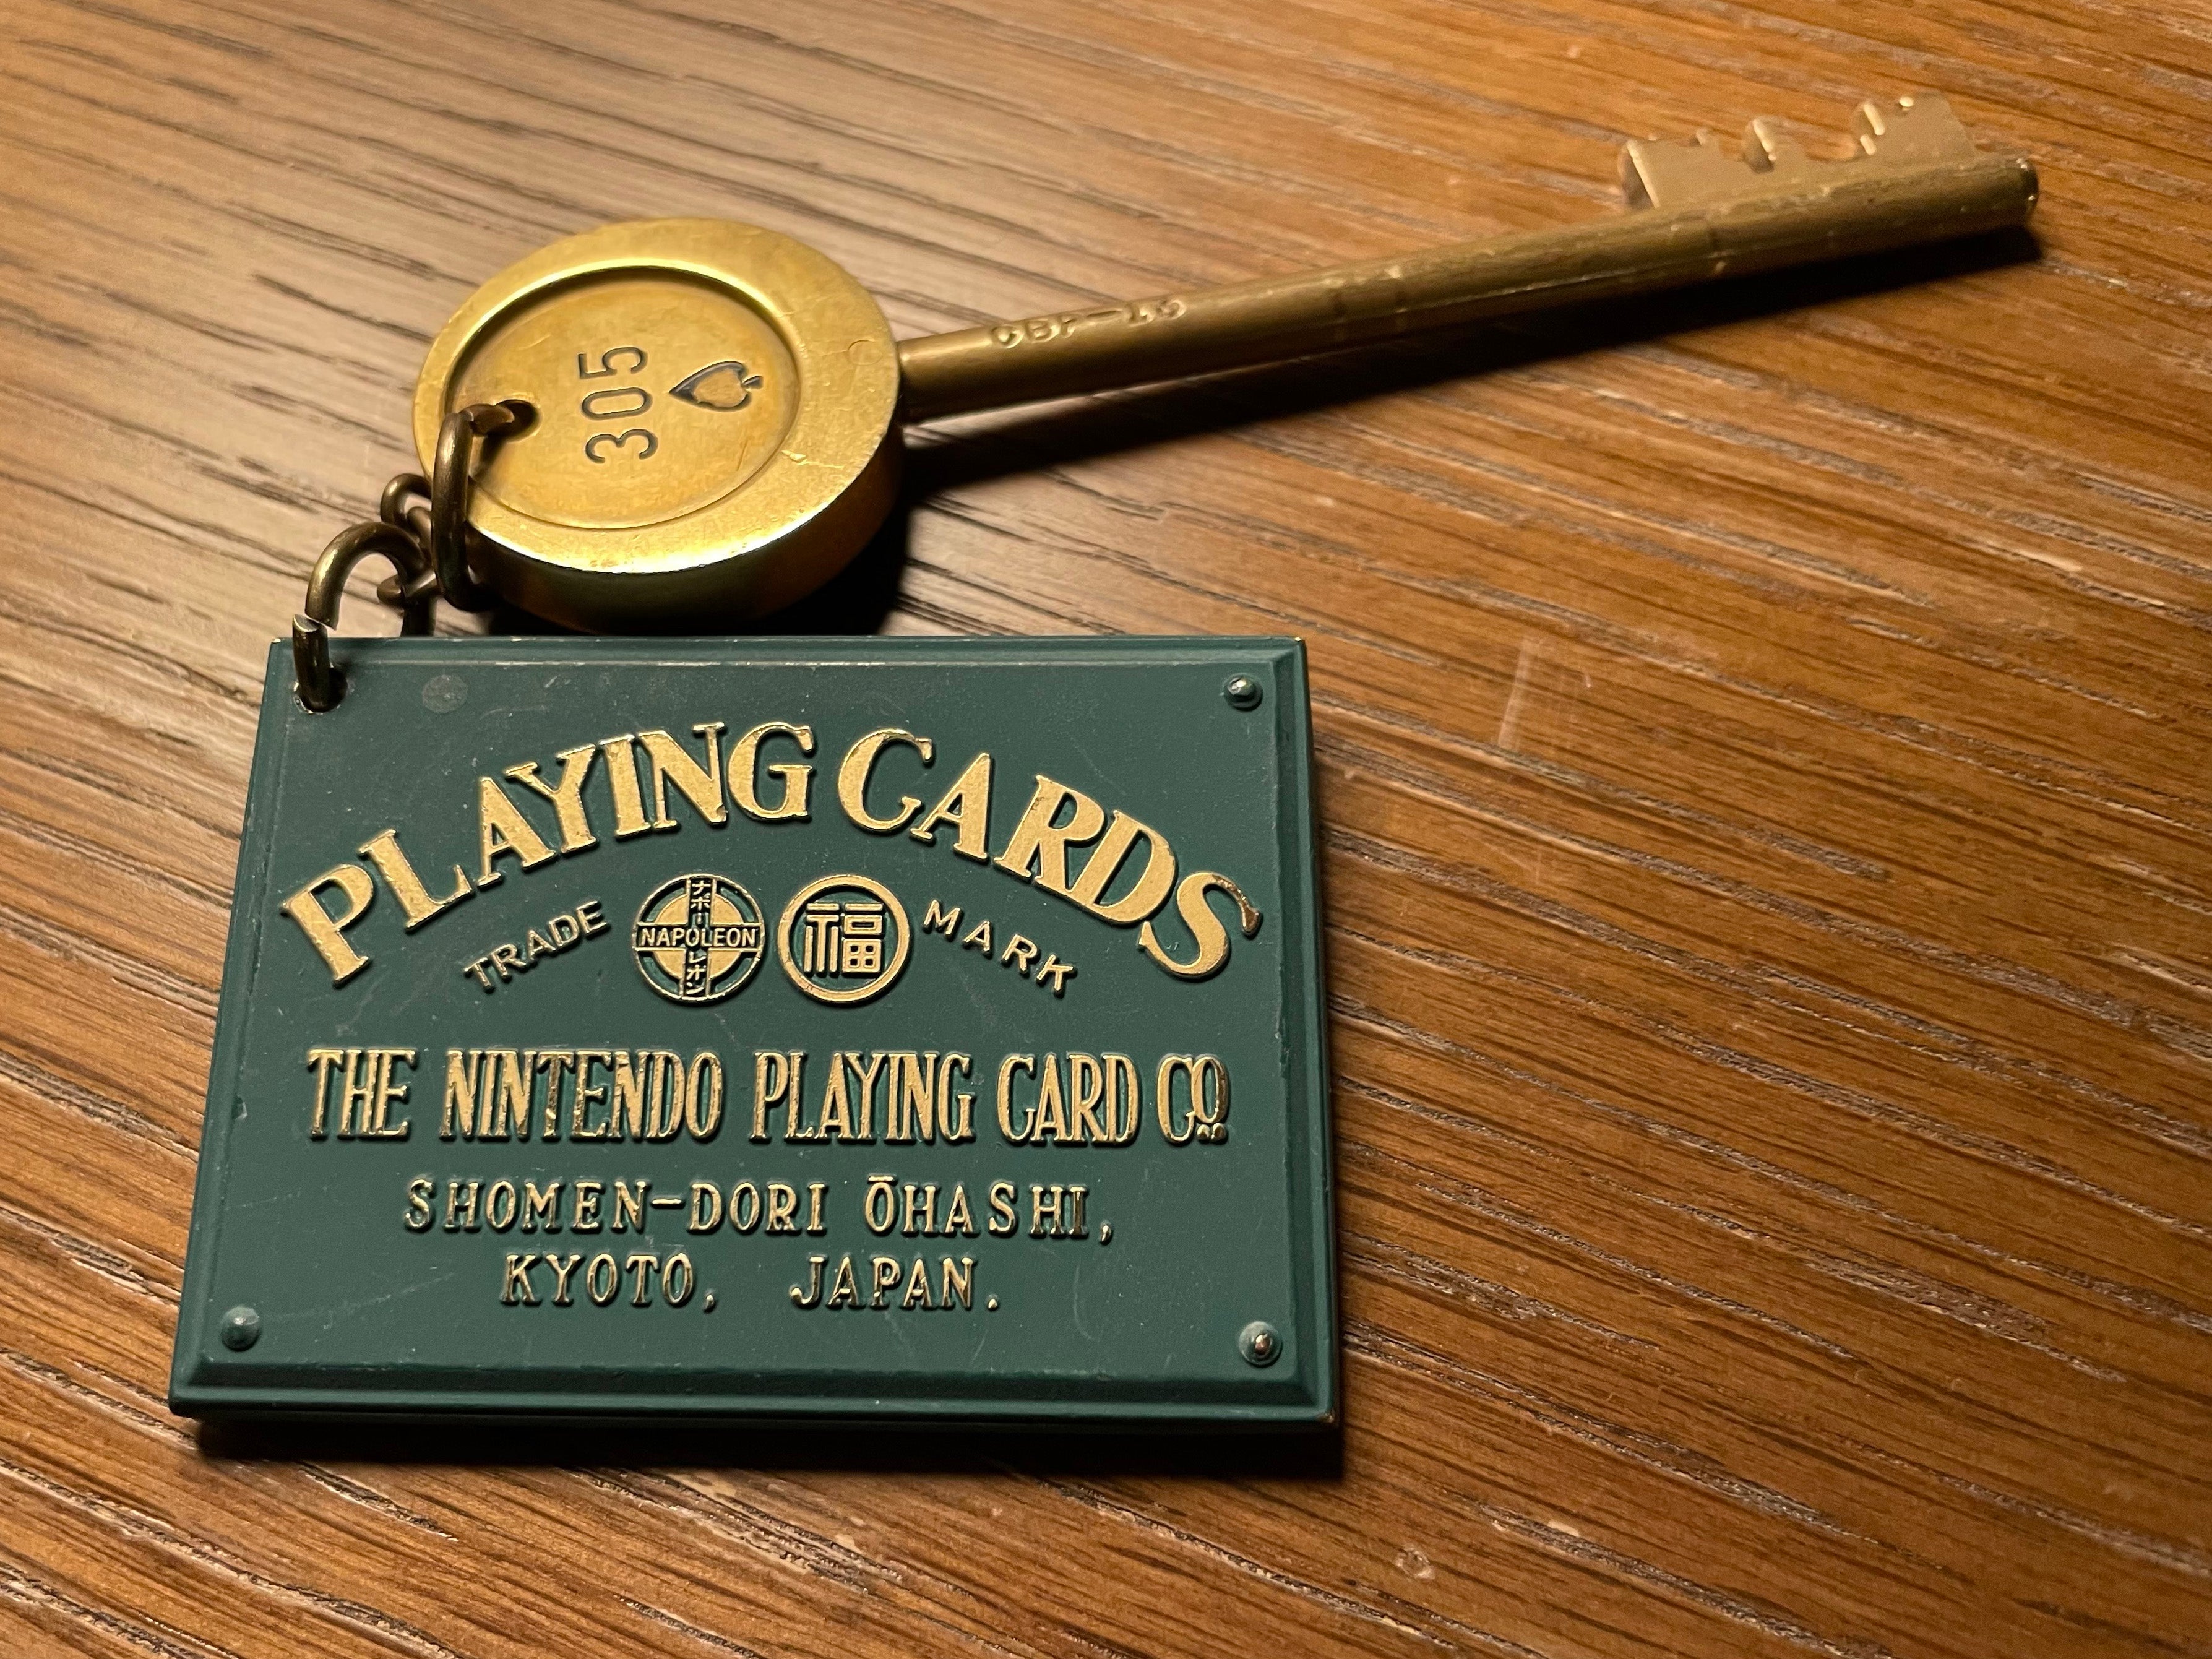 A Mortis key with a number on it, attached on a keyring to a green, card-sized rectangular metal plaque that reads "Playing Cards" by "The Nintendo Playing Card Co.".